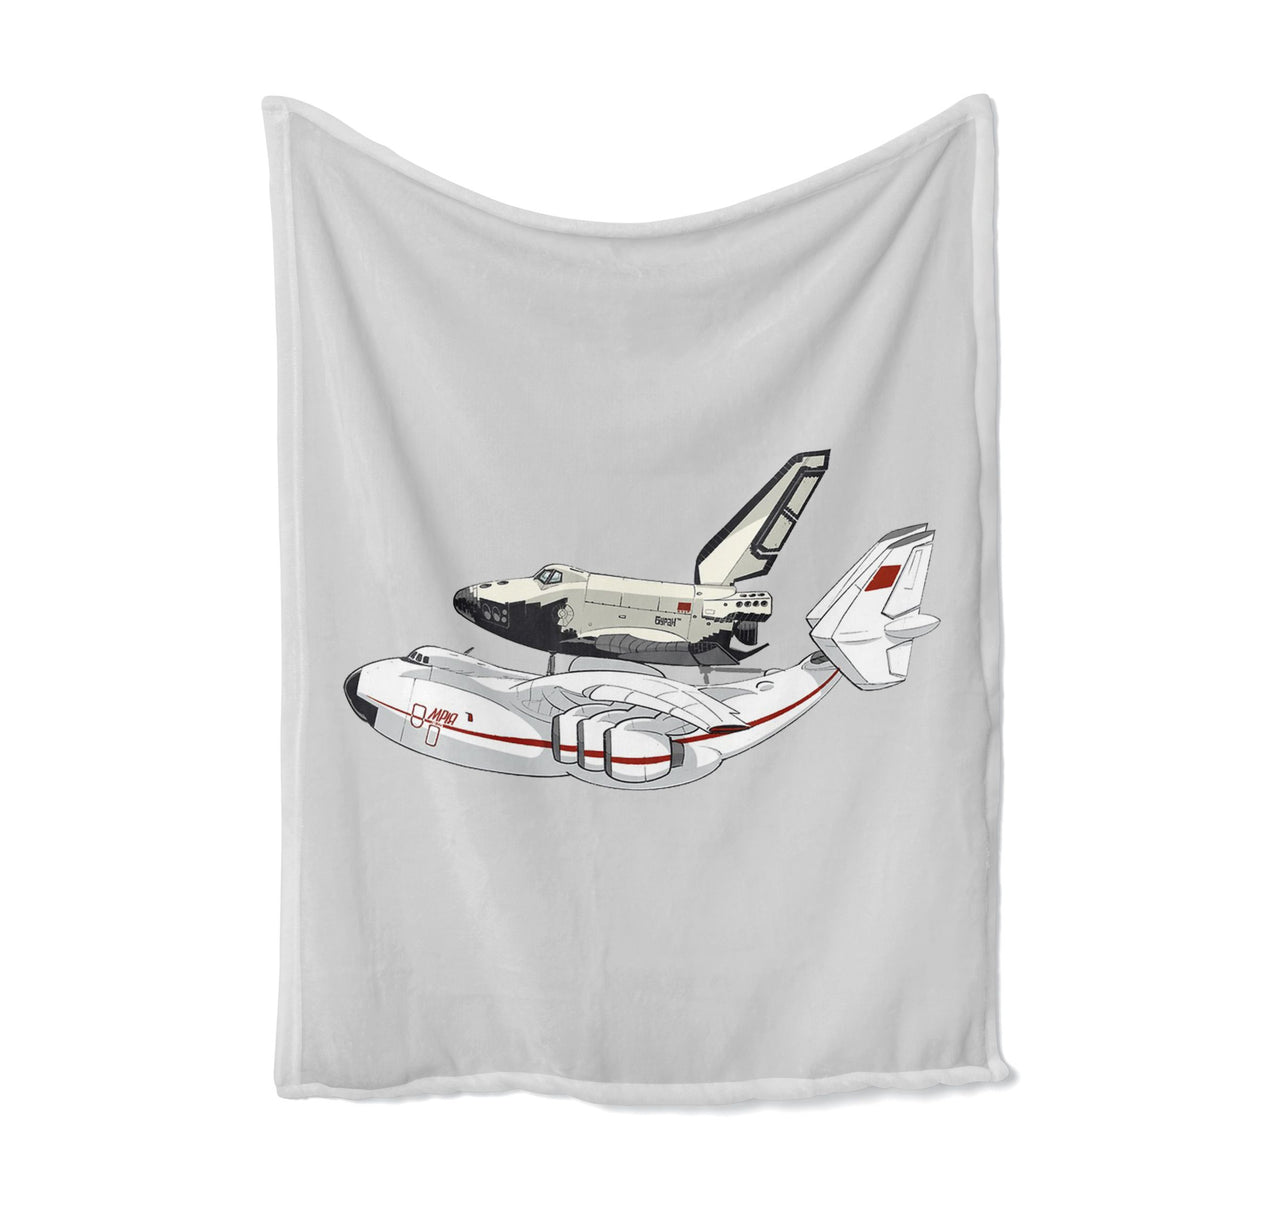 Buran & An-225 Designed Bed Blankets & Covers